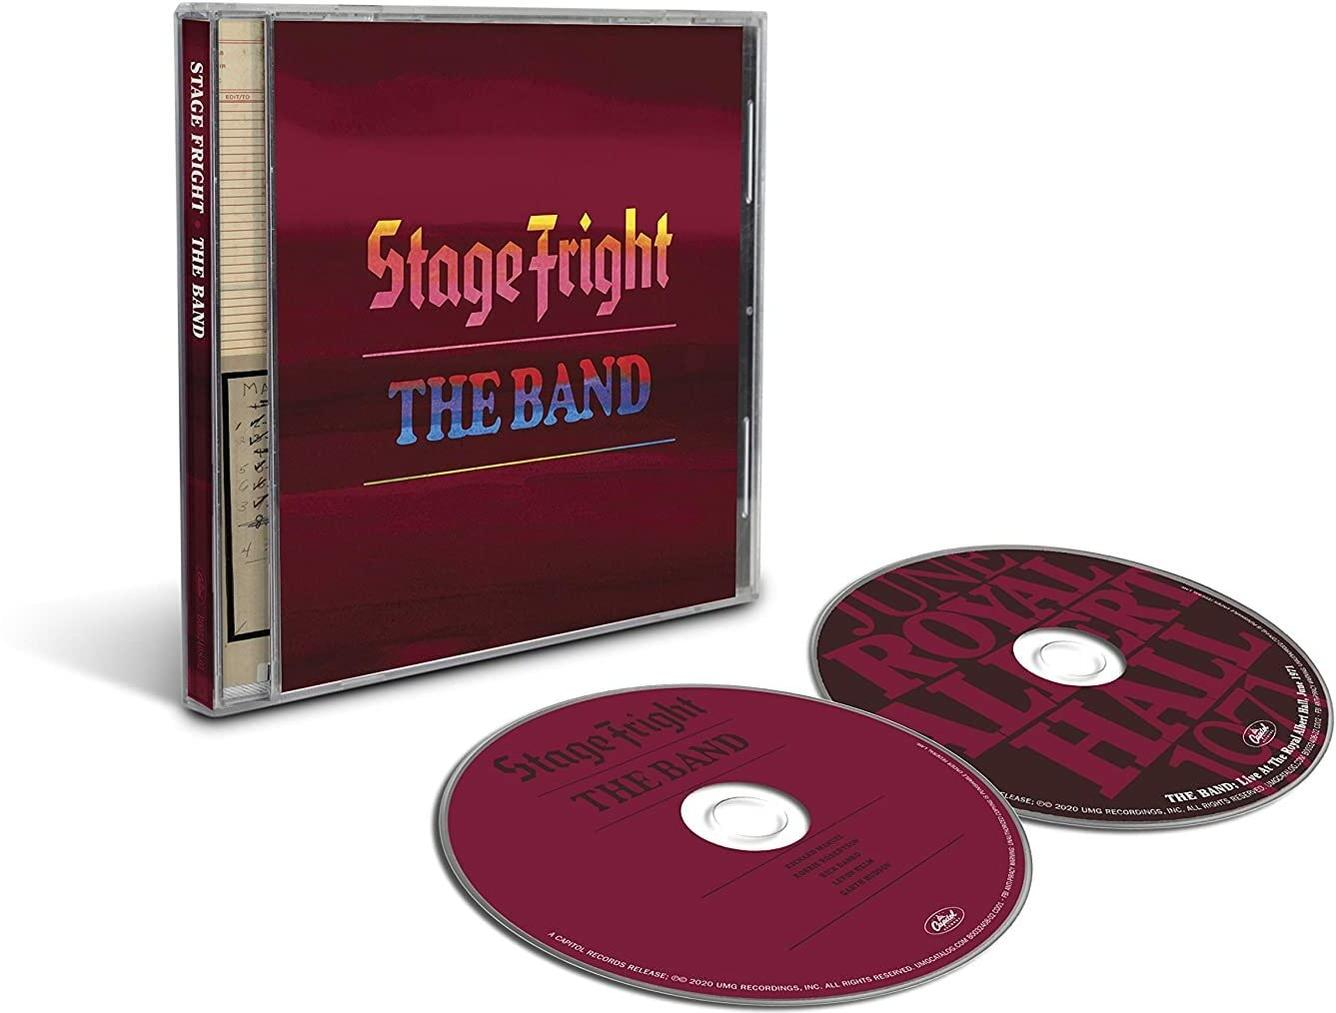 Fright The Band - (CD) - Stage